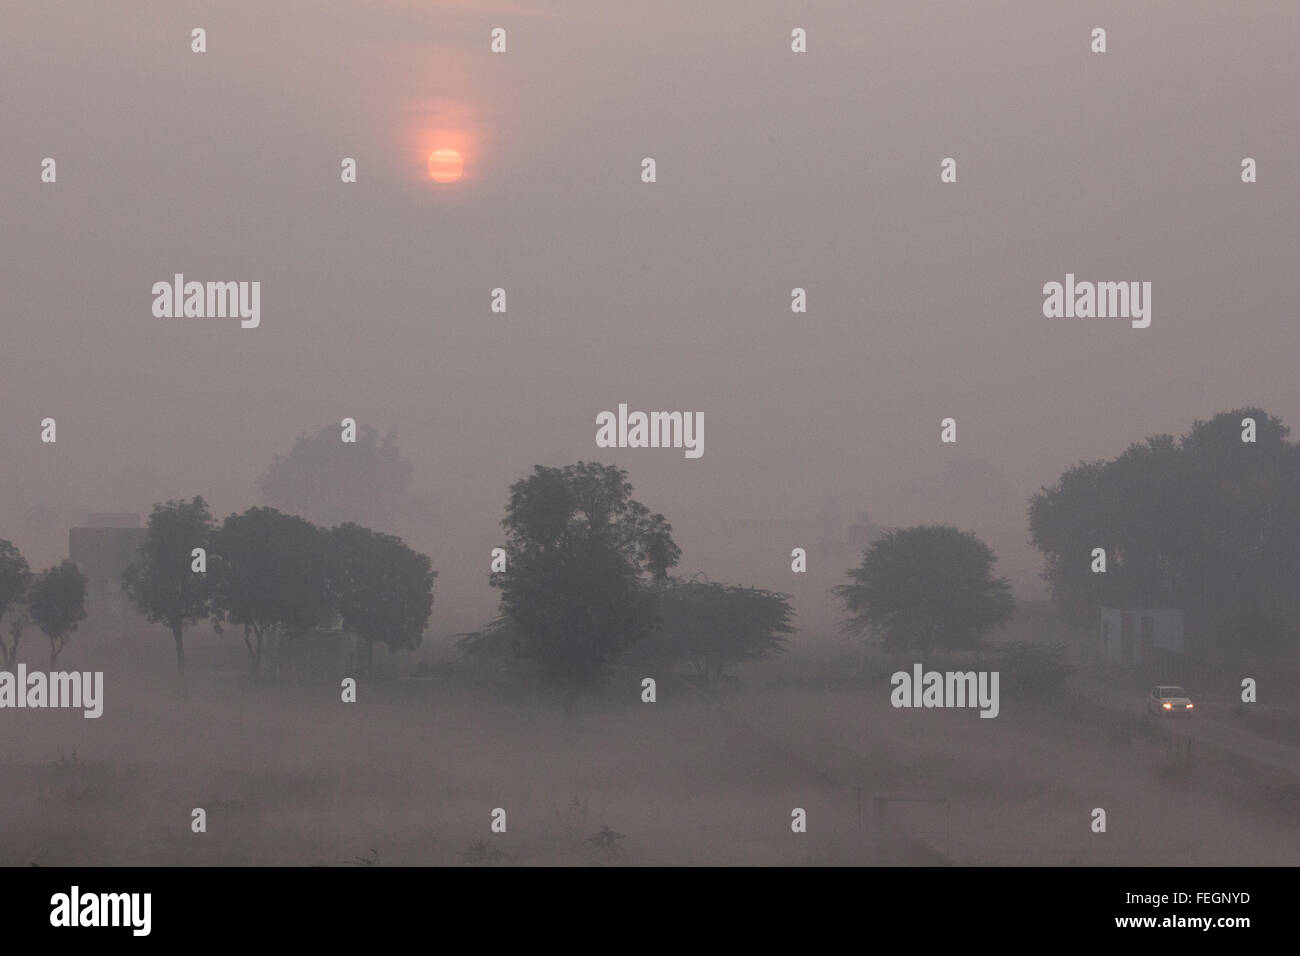 Early morning in Agra, India. The sun can be seen through an atmosphere of pollution and cloudy conditions. Stock Photo